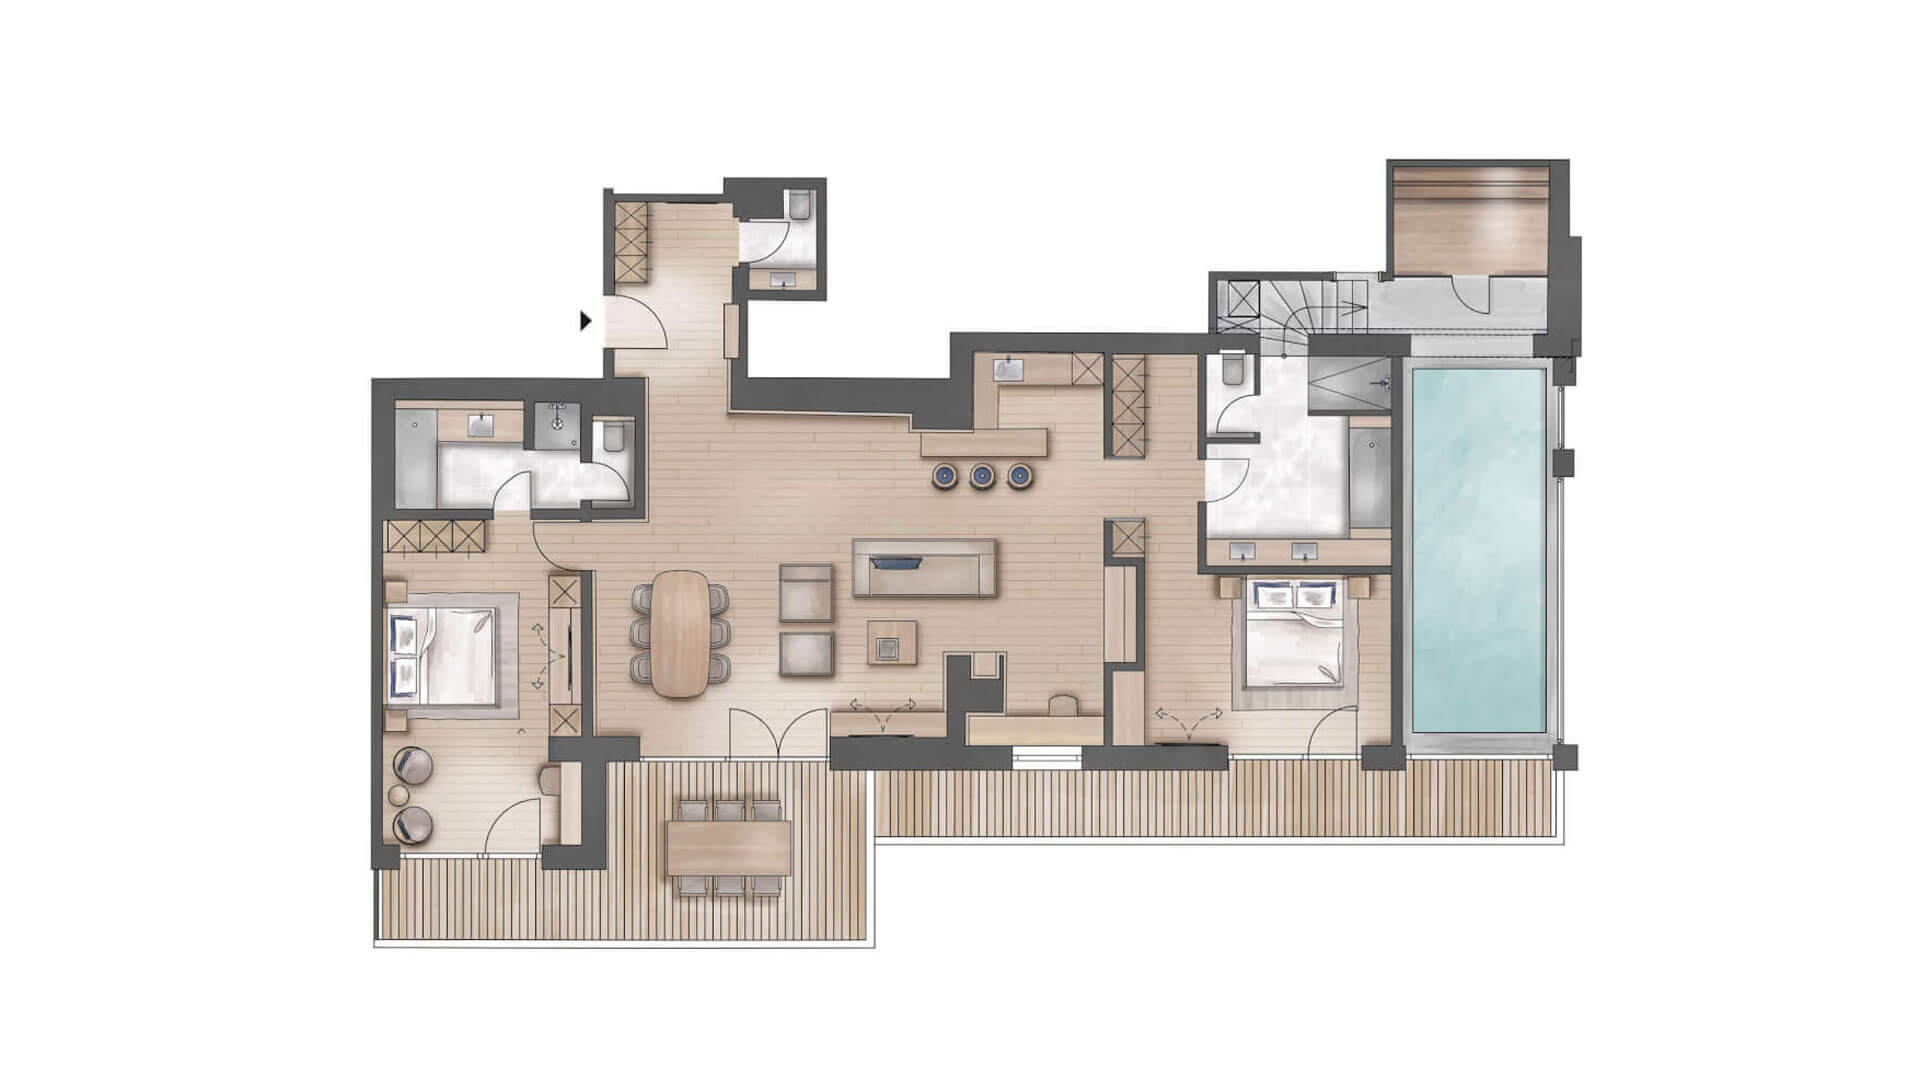 A floor plan of a house on the website of Promontoria Hochgurgl GmbH - TOP Hotel Hochgurgl